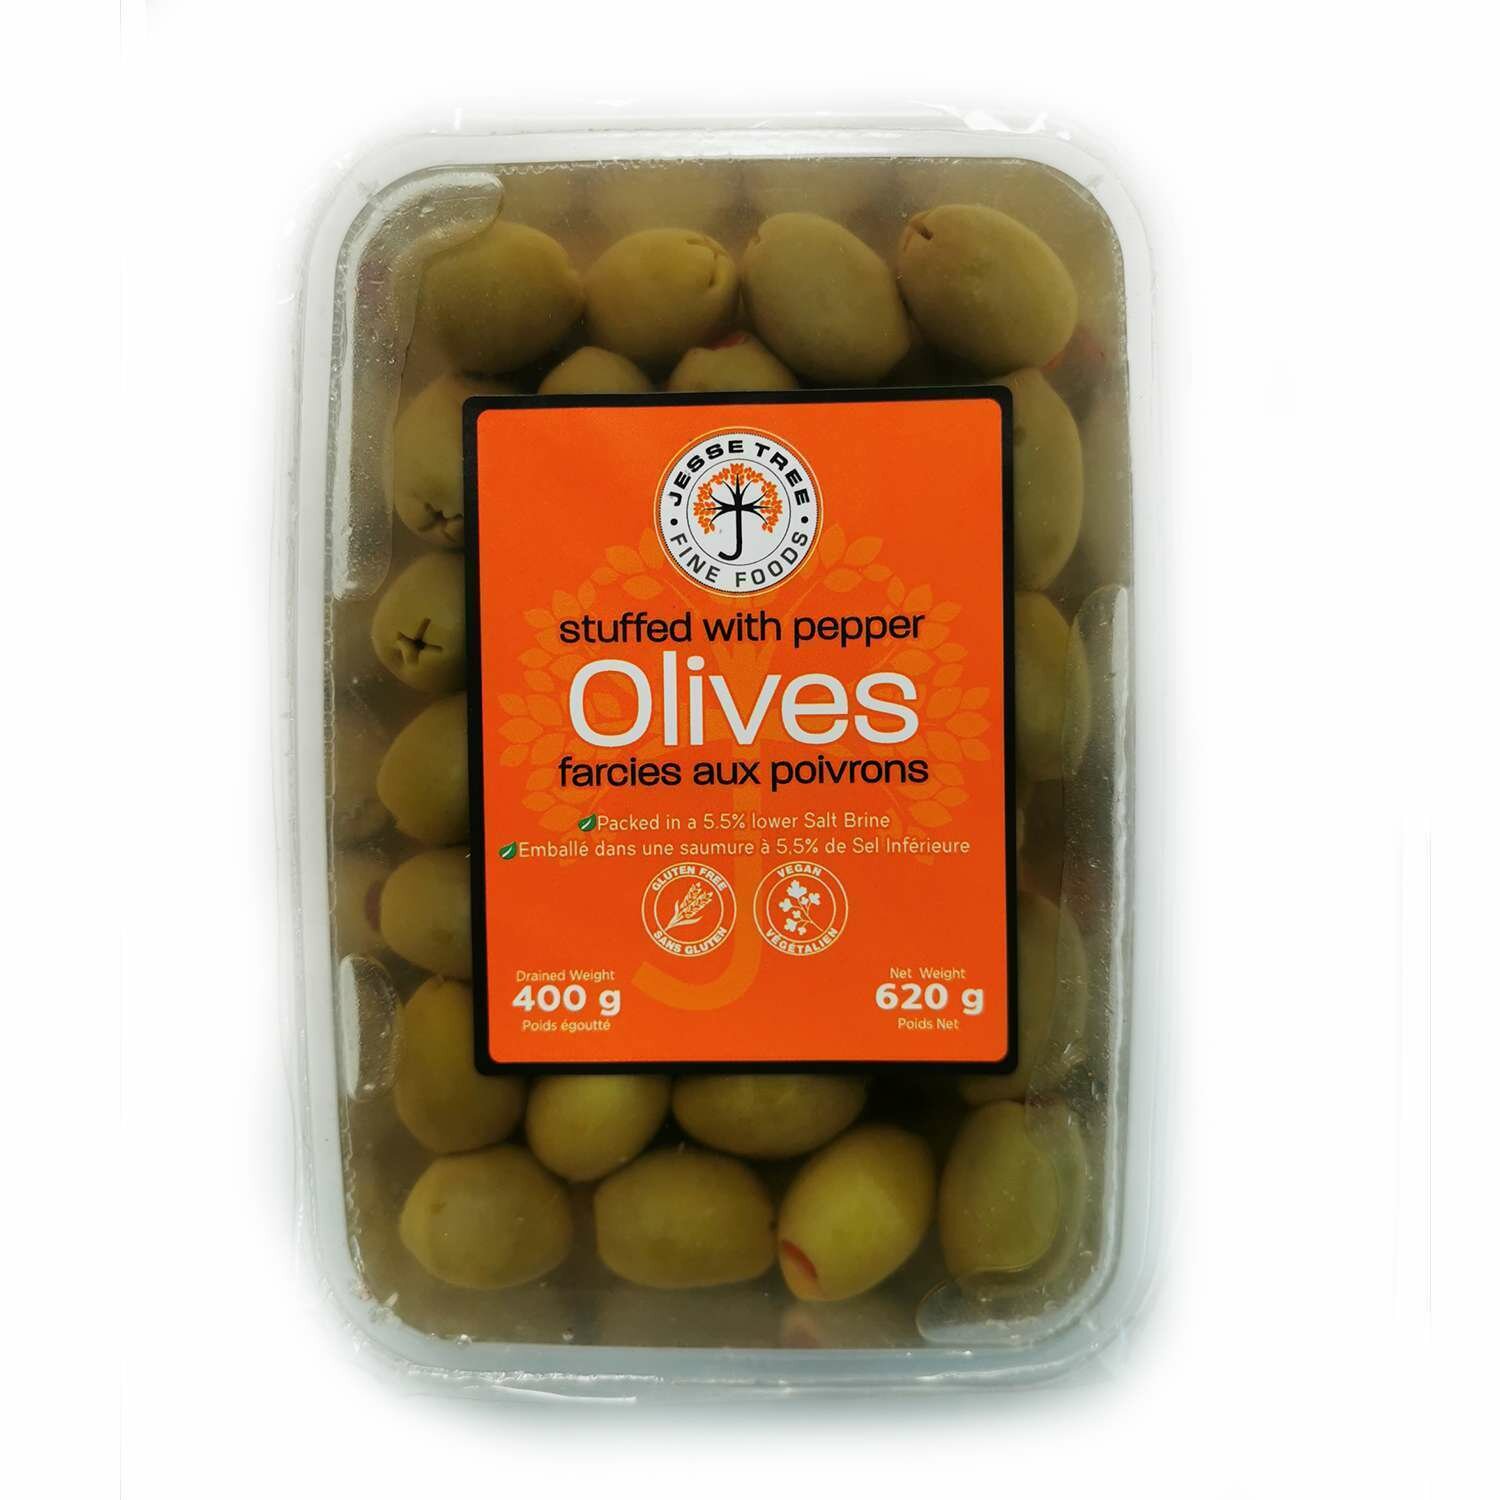 Green Olives stuffed w/Peppers (620g)